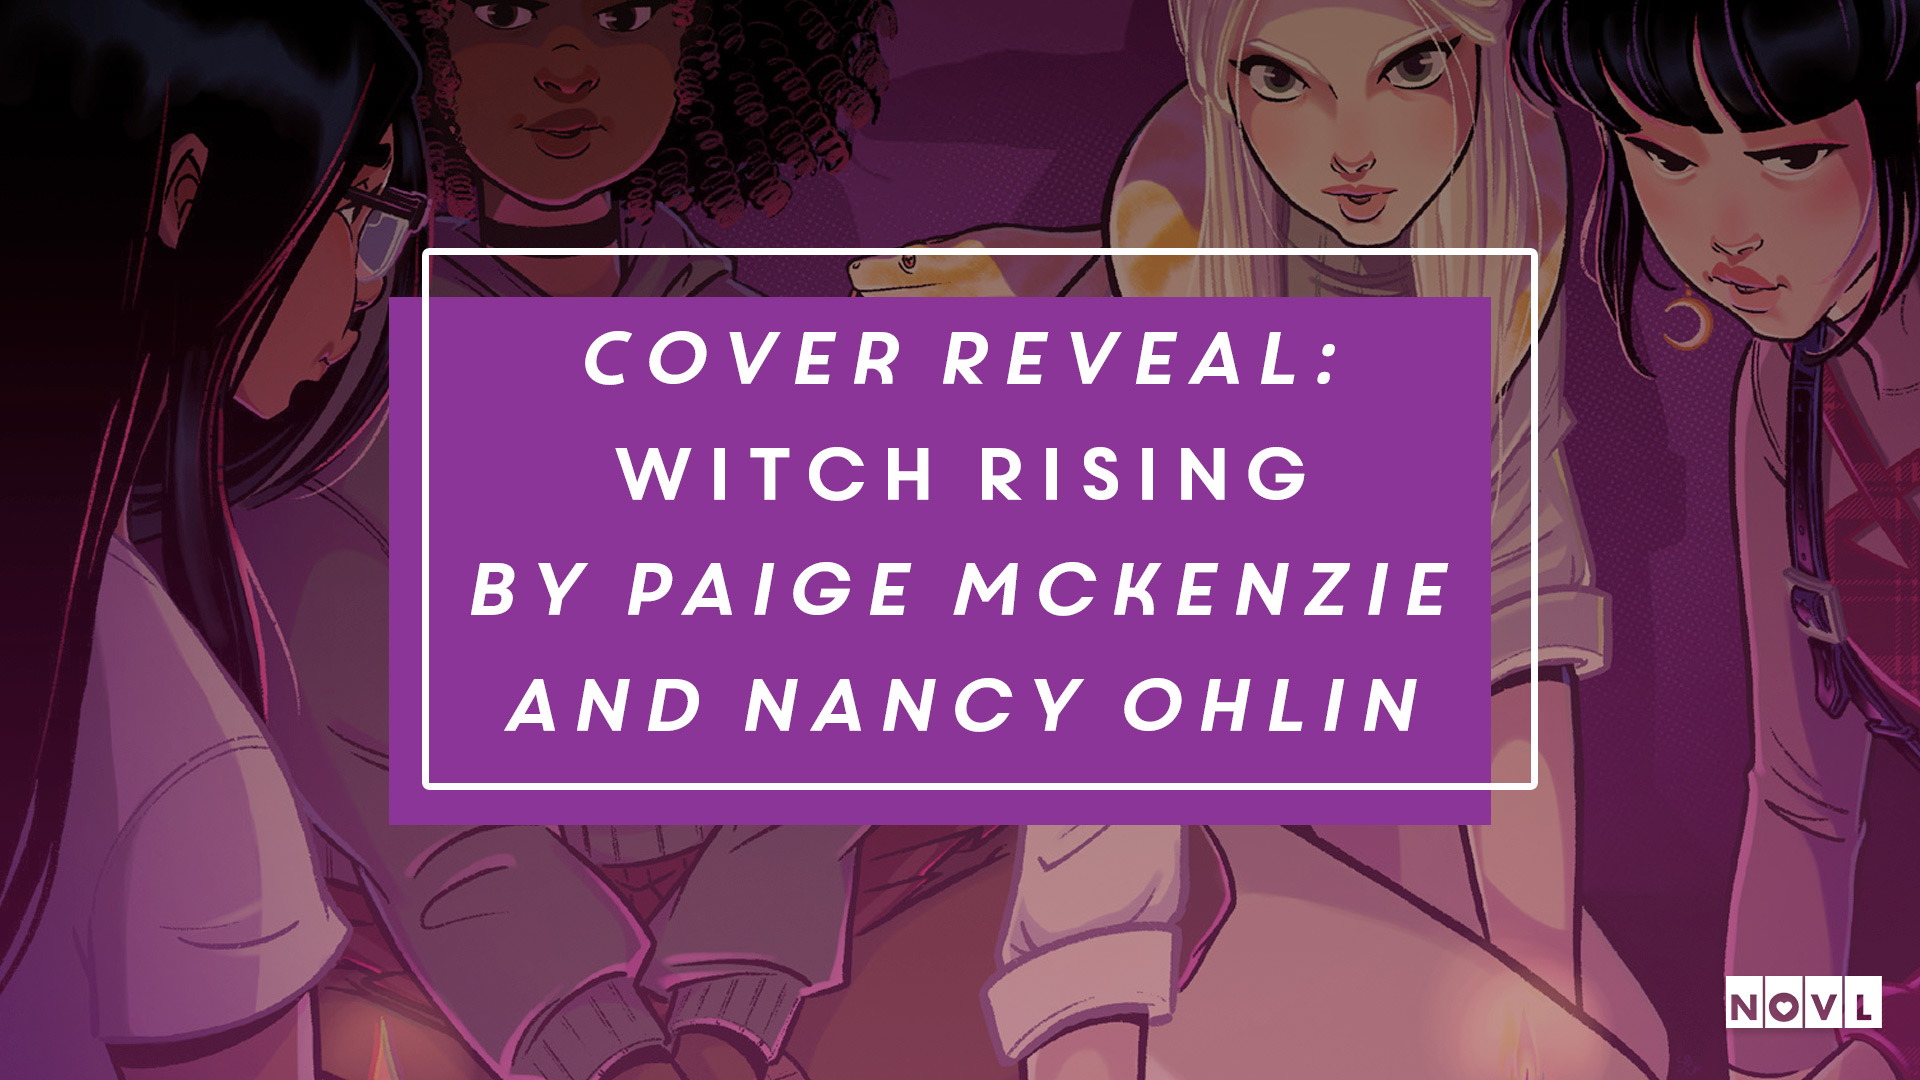 The NOVL Blog, Featured Image for Article: Cover Reveal: Witch Rising by Paige McKenzie and Nancy Ohlin